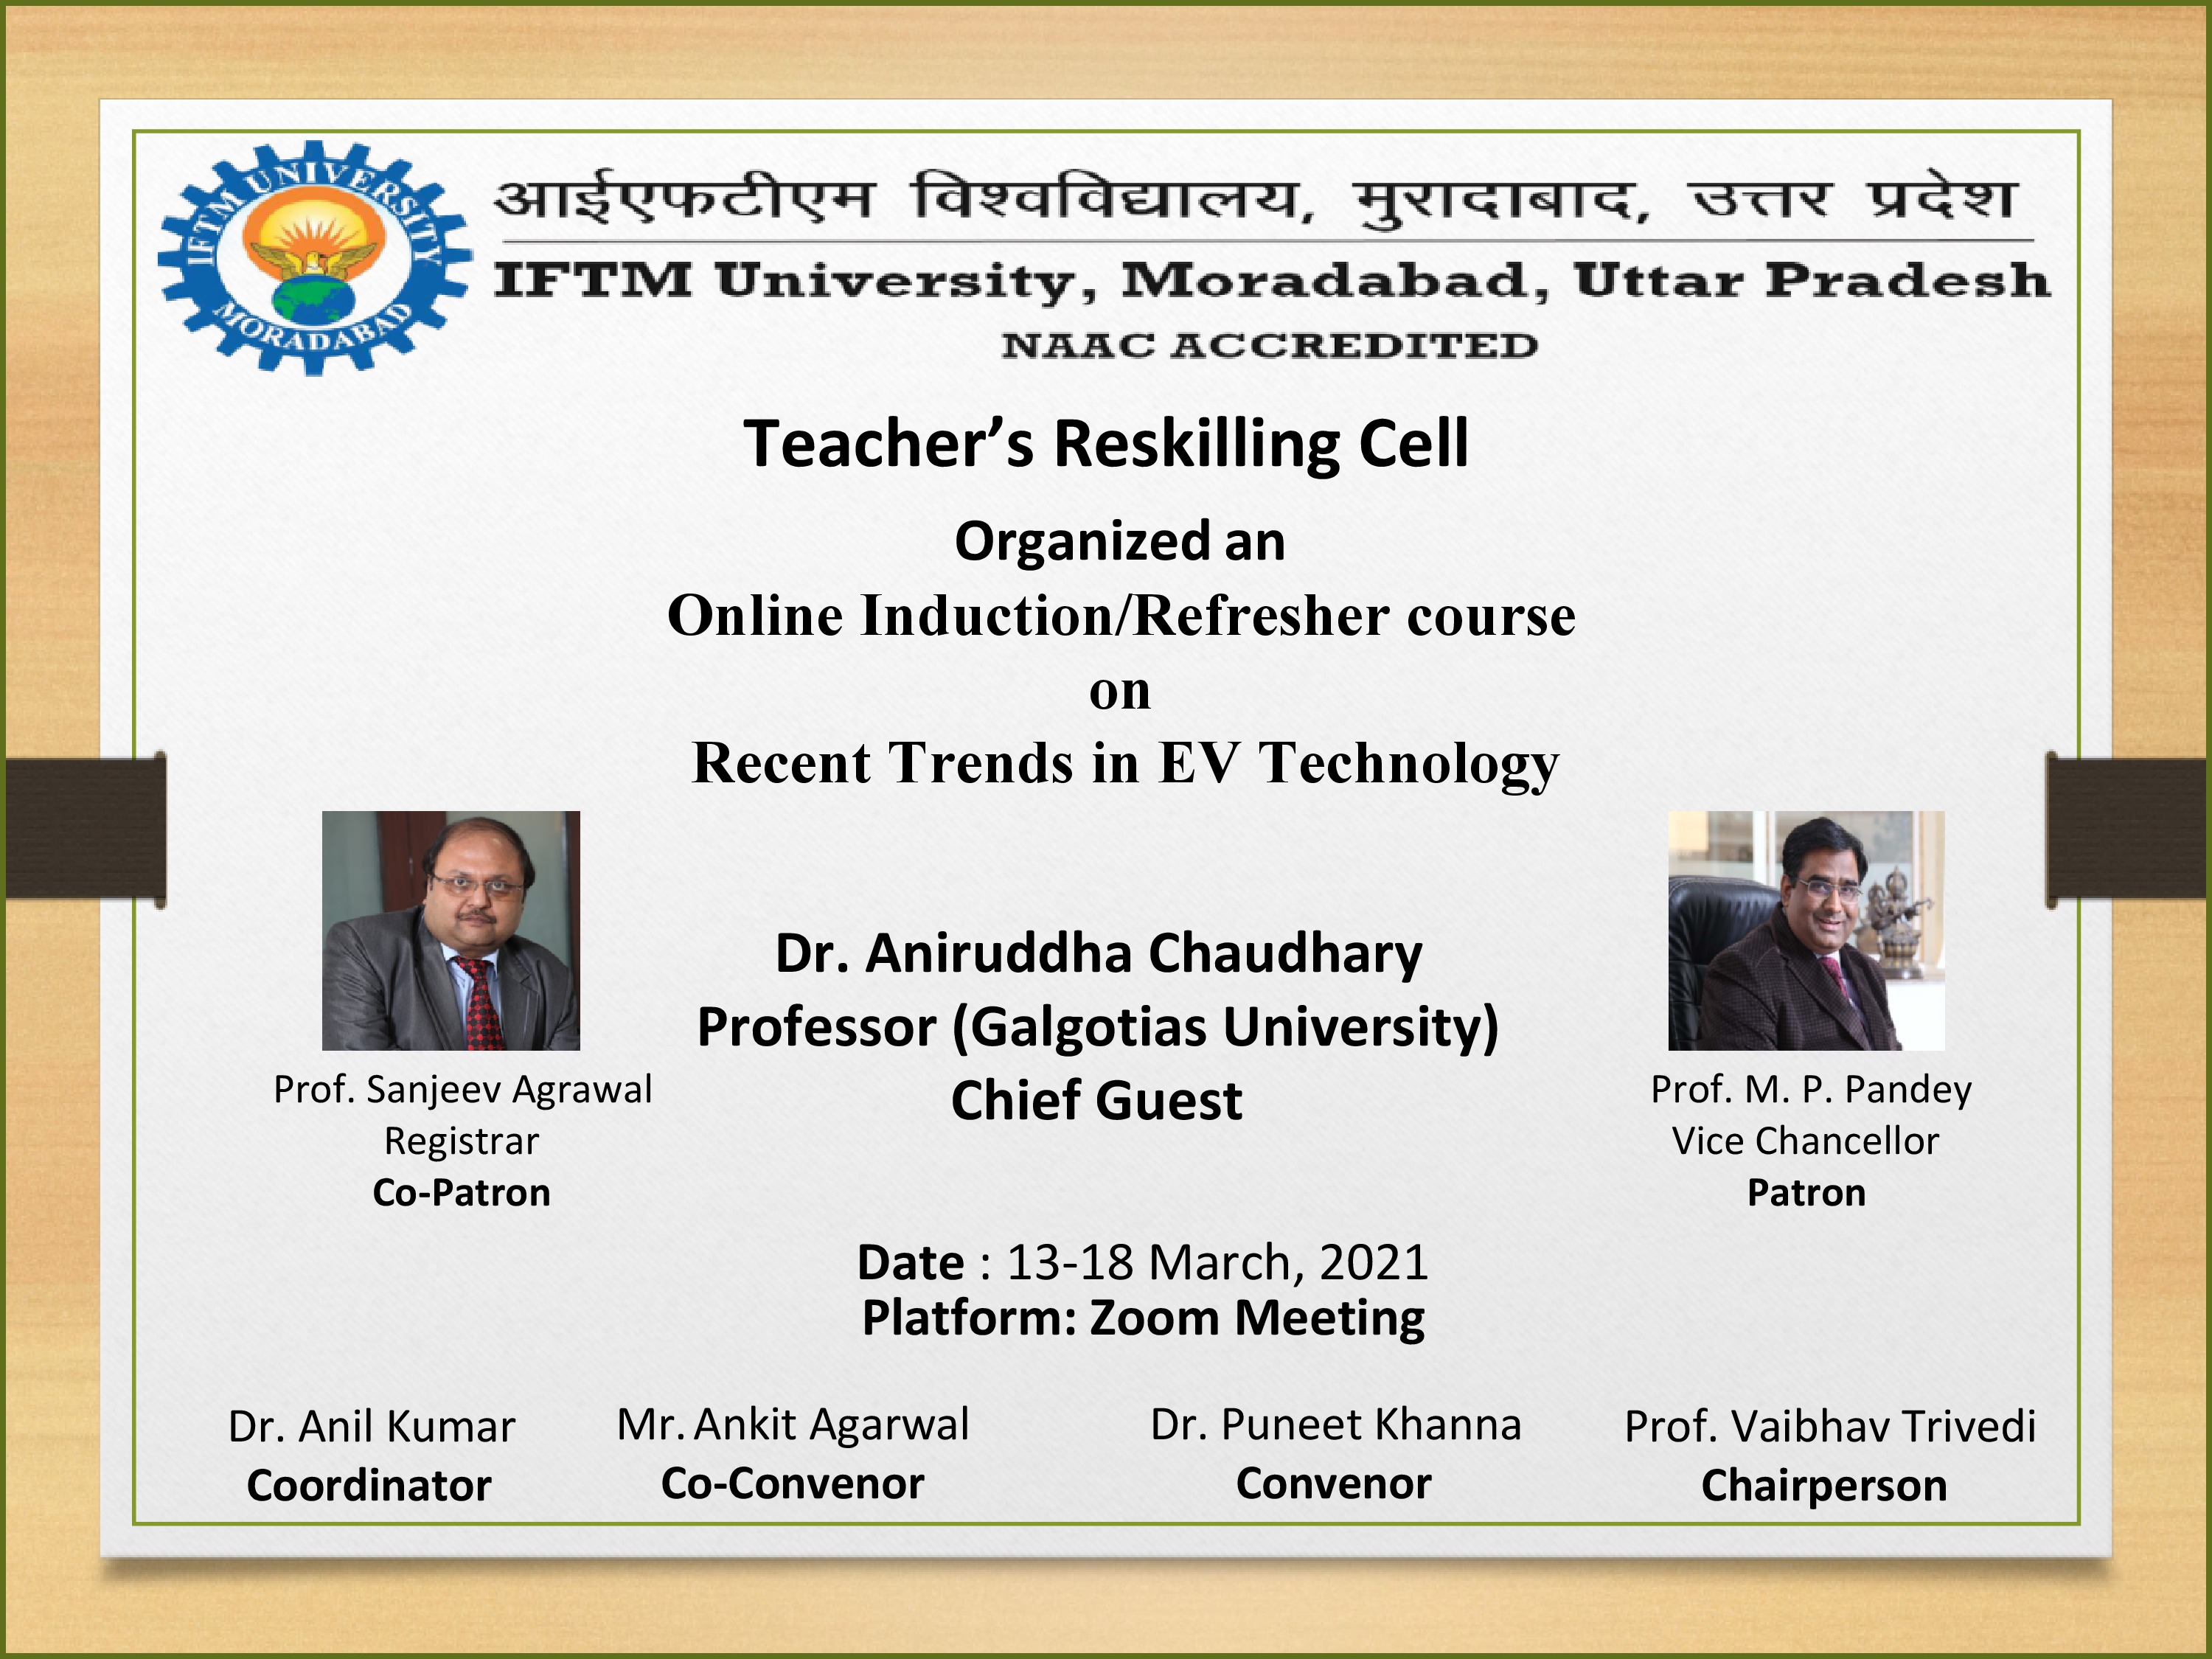 Online Induction/Refresher course on Recent Trends in EV Technology